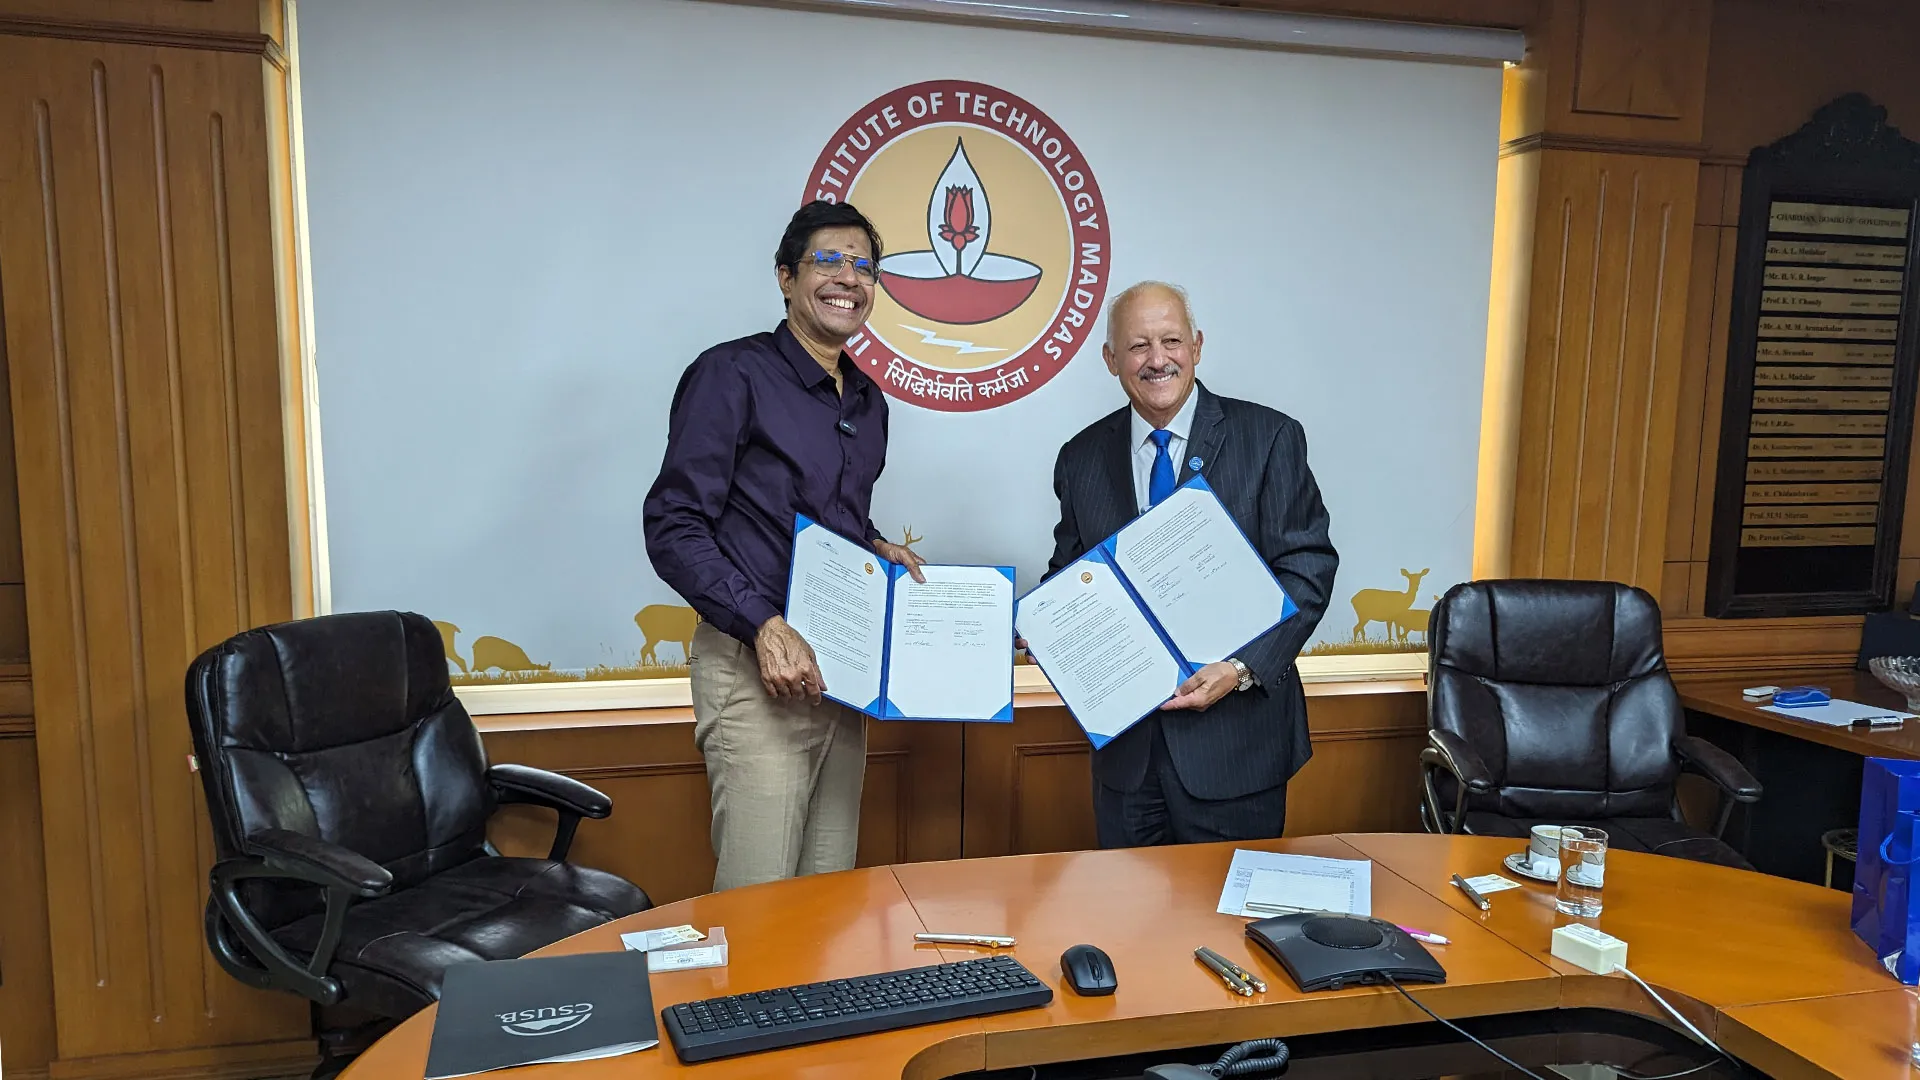 IIT Madras Director Prof. V. Kamakoti (left) and CSUSB President Tomás D. Morales have signed a memorandum of understanding agreement aimed at fostering educational and cultural ties, promoting research collaboration, and strengthening ties between the two institutions.